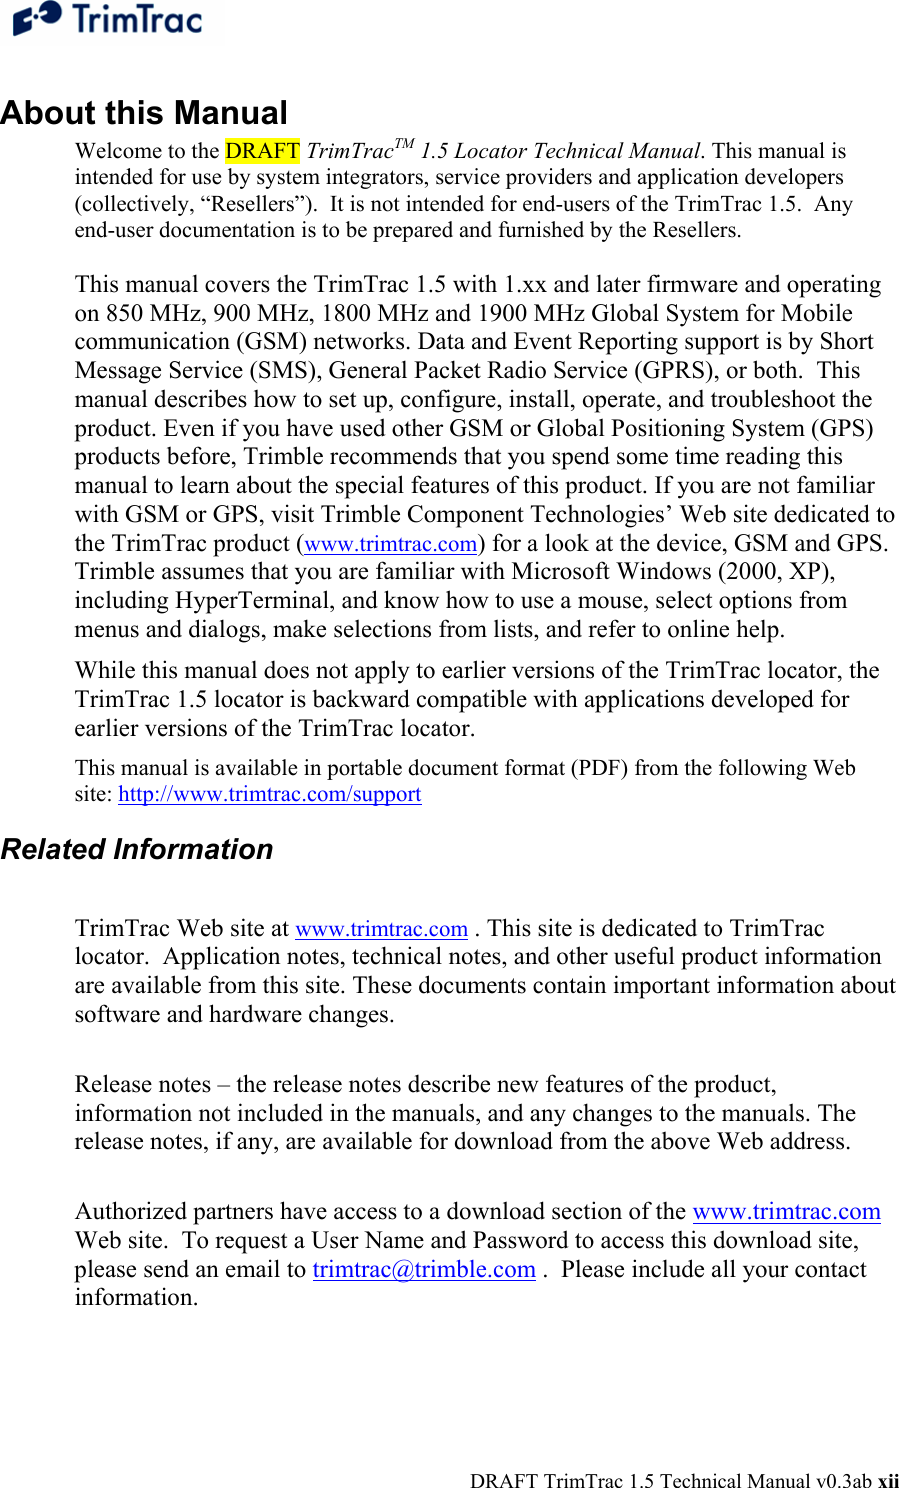  DRAFT TrimTrac 1.5 Technical Manual v0.3ab xii About this Manual Welcome to the DRAFT TrimTracTM 1.5 Locator Technical Manual. This manual is intended for use by system integrators, service providers and application developers (collectively, “Resellers”).  It is not intended for end-users of the TrimTrac 1.5.  Any end-user documentation is to be prepared and furnished by the Resellers.  This manual covers the TrimTrac 1.5 with 1.xx and later firmware and operating on 850 MHz, 900 MHz, 1800 MHz and 1900 MHz Global System for Mobile communication (GSM) networks. Data and Event Reporting support is by Short Message Service (SMS), General Packet Radio Service (GPRS), or both.  This manual describes how to set up, configure, install, operate, and troubleshoot the product. Even if you have used other GSM or Global Positioning System (GPS) products before, Trimble recommends that you spend some time reading this manual to learn about the special features of this product. If you are not familiar with GSM or GPS, visit Trimble Component Technologies’ Web site dedicated to the TrimTrac product (www.trimtrac.com) for a look at the device, GSM and GPS. Trimble assumes that you are familiar with Microsoft Windows (2000, XP), including HyperTerminal, and know how to use a mouse, select options from menus and dialogs, make selections from lists, and refer to online help. While this manual does not apply to earlier versions of the TrimTrac locator, the TrimTrac 1.5 locator is backward compatible with applications developed for earlier versions of the TrimTrac locator.   This manual is available in portable document format (PDF) from the following Web site: http://www.trimtrac.com/support  Related Information  TrimTrac Web site at www.trimtrac.com . This site is dedicated to TrimTrac locator.  Application notes, technical notes, and other useful product information are available from this site. These documents contain important information about software and hardware changes.   Release notes – the release notes describe new features of the product, information not included in the manuals, and any changes to the manuals. The release notes, if any, are available for download from the above Web address.   Authorized partners have access to a download section of the www.trimtrac.com Web site.  To request a User Name and Password to access this download site, please send an email to trimtrac@trimble.com .  Please include all your contact information.  